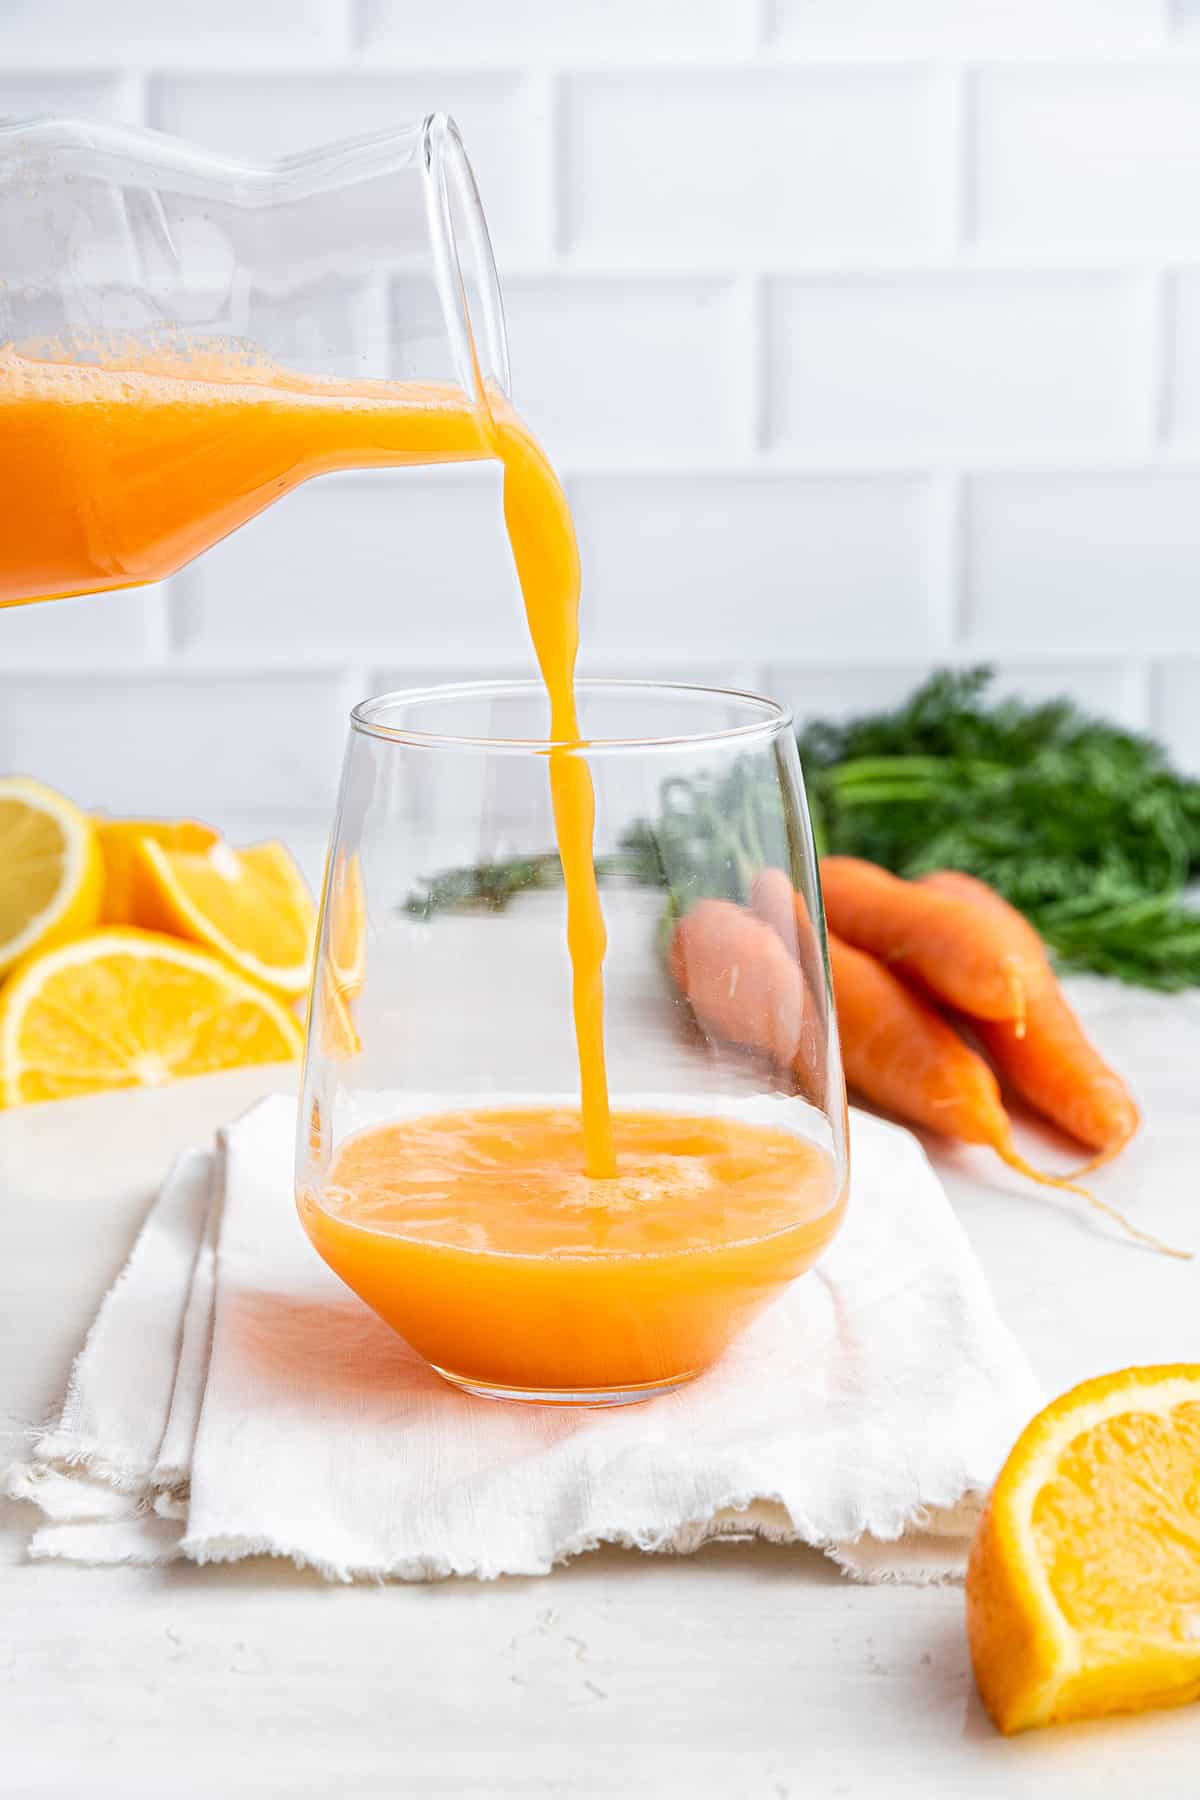 Pouring carrot juice from carafe into glass